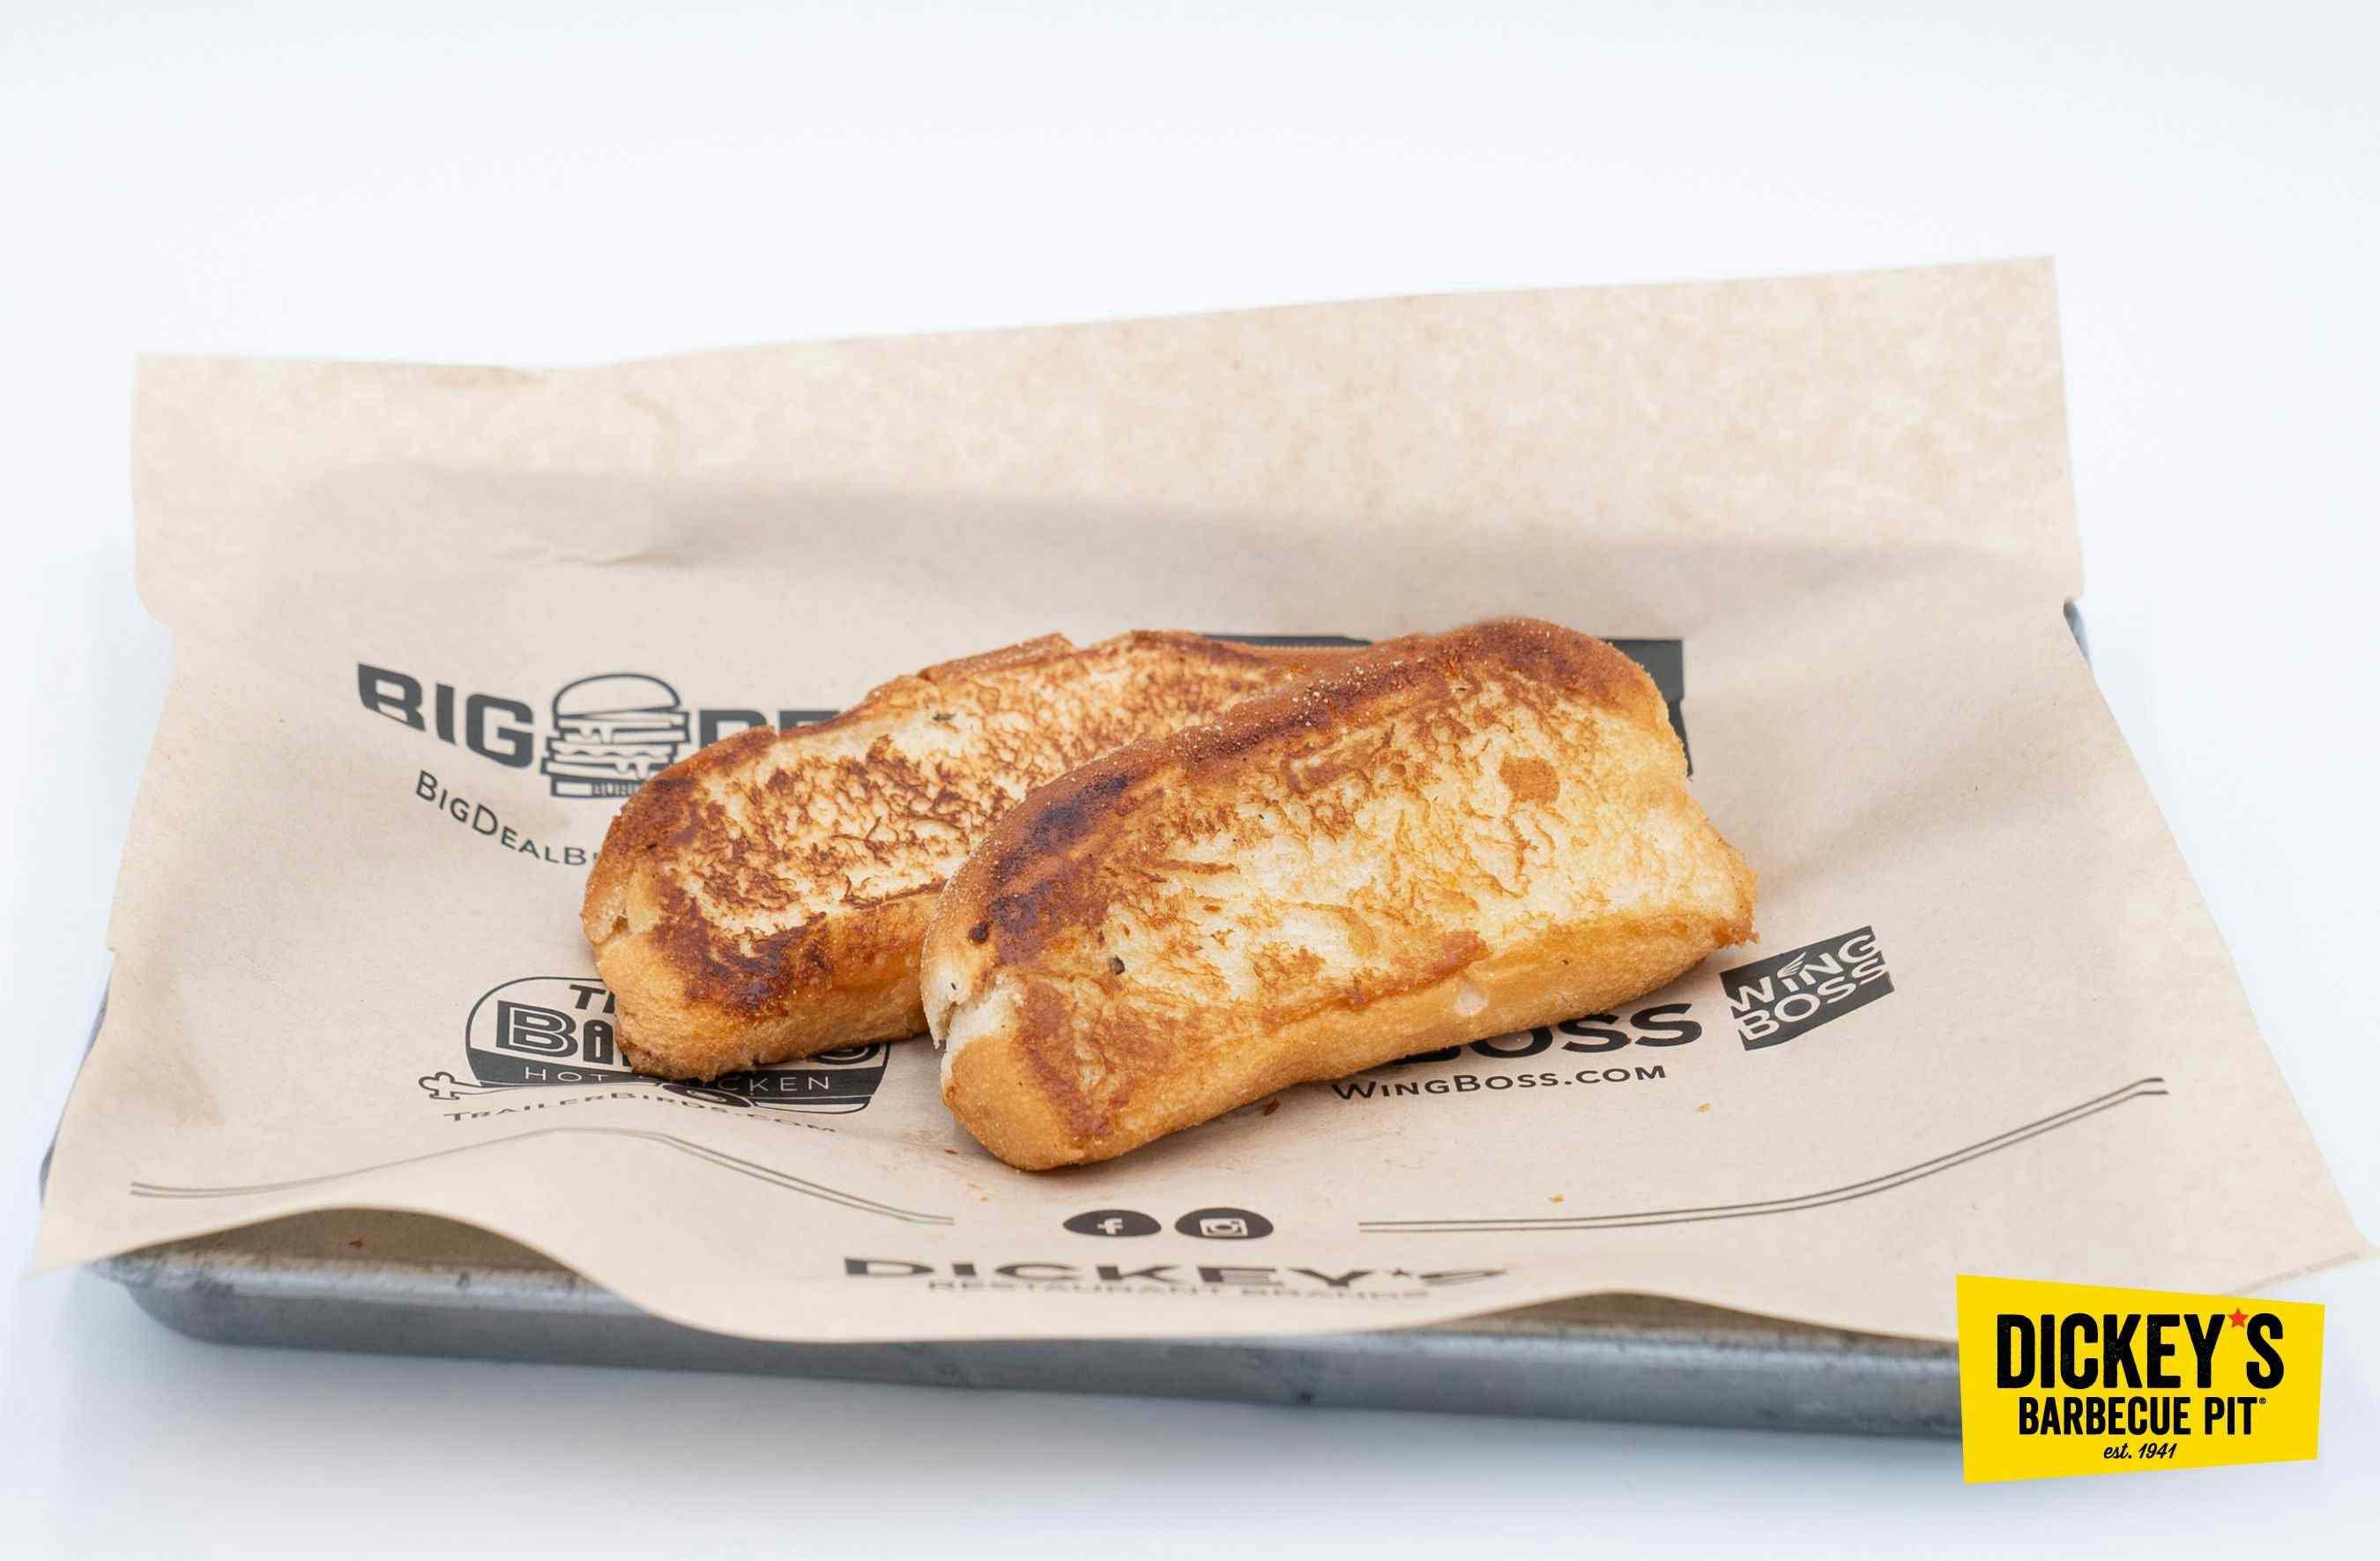 Dickey’s Barbecue Pit Launches New Texas Toast